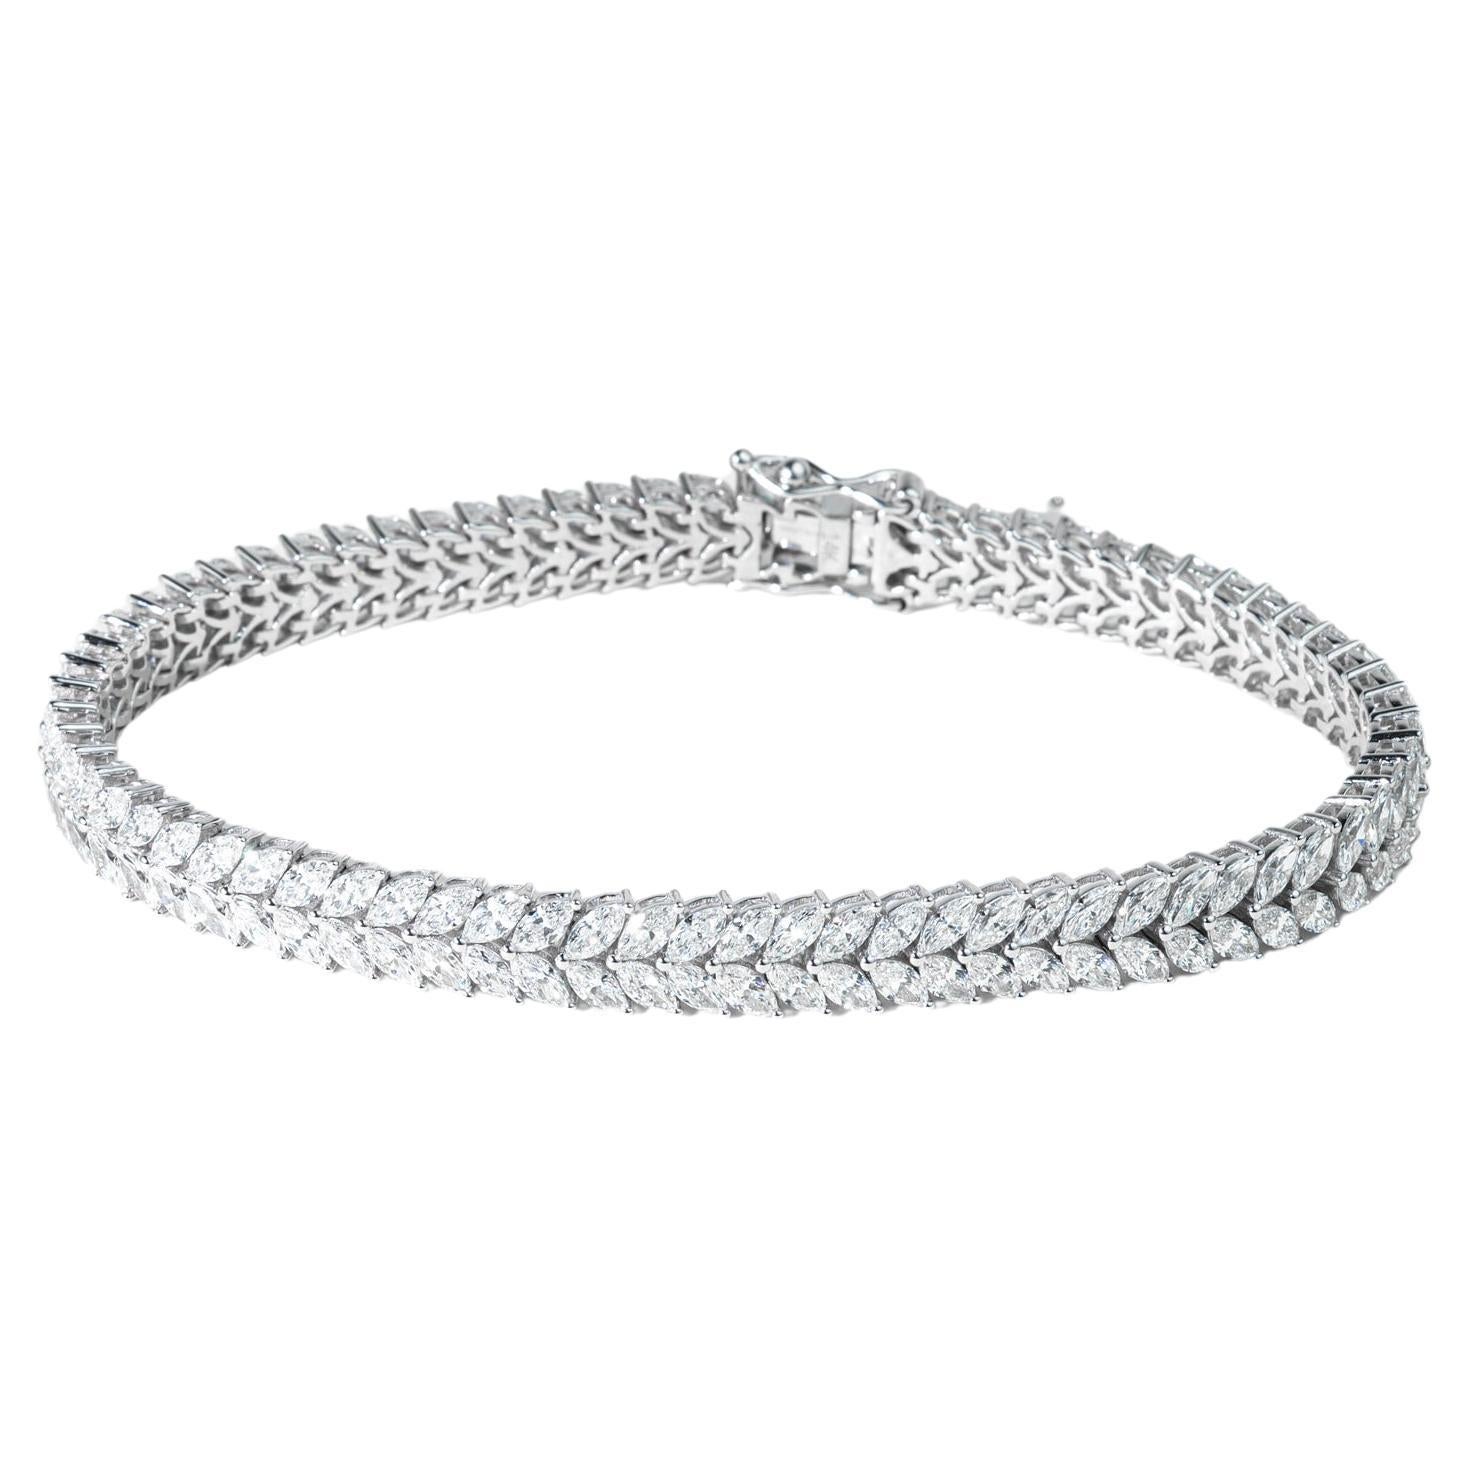 9 Carat Marquise Cut Natural Diamond Tennis Bracelet in 14k White Gold For Sale